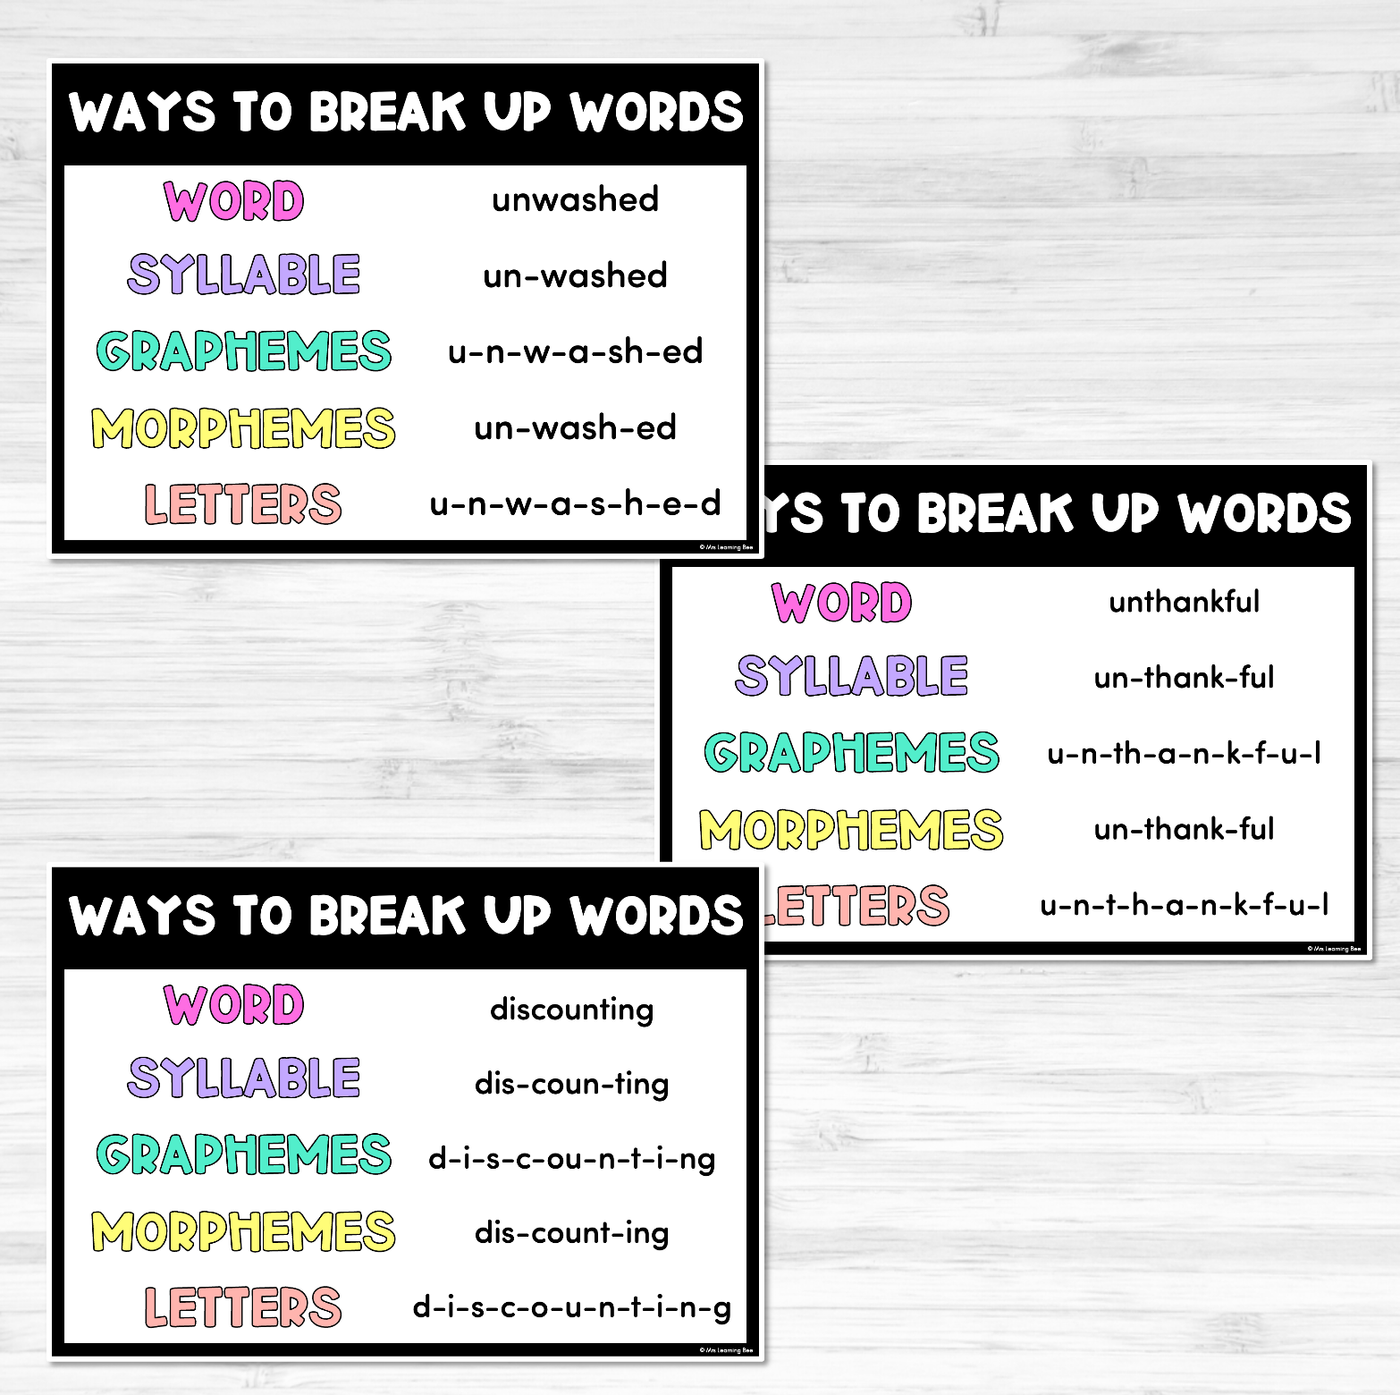 WAYS TO BREAK UP WORDS Posters- Words, Syllables, Graphemes, Morphemes, Letters